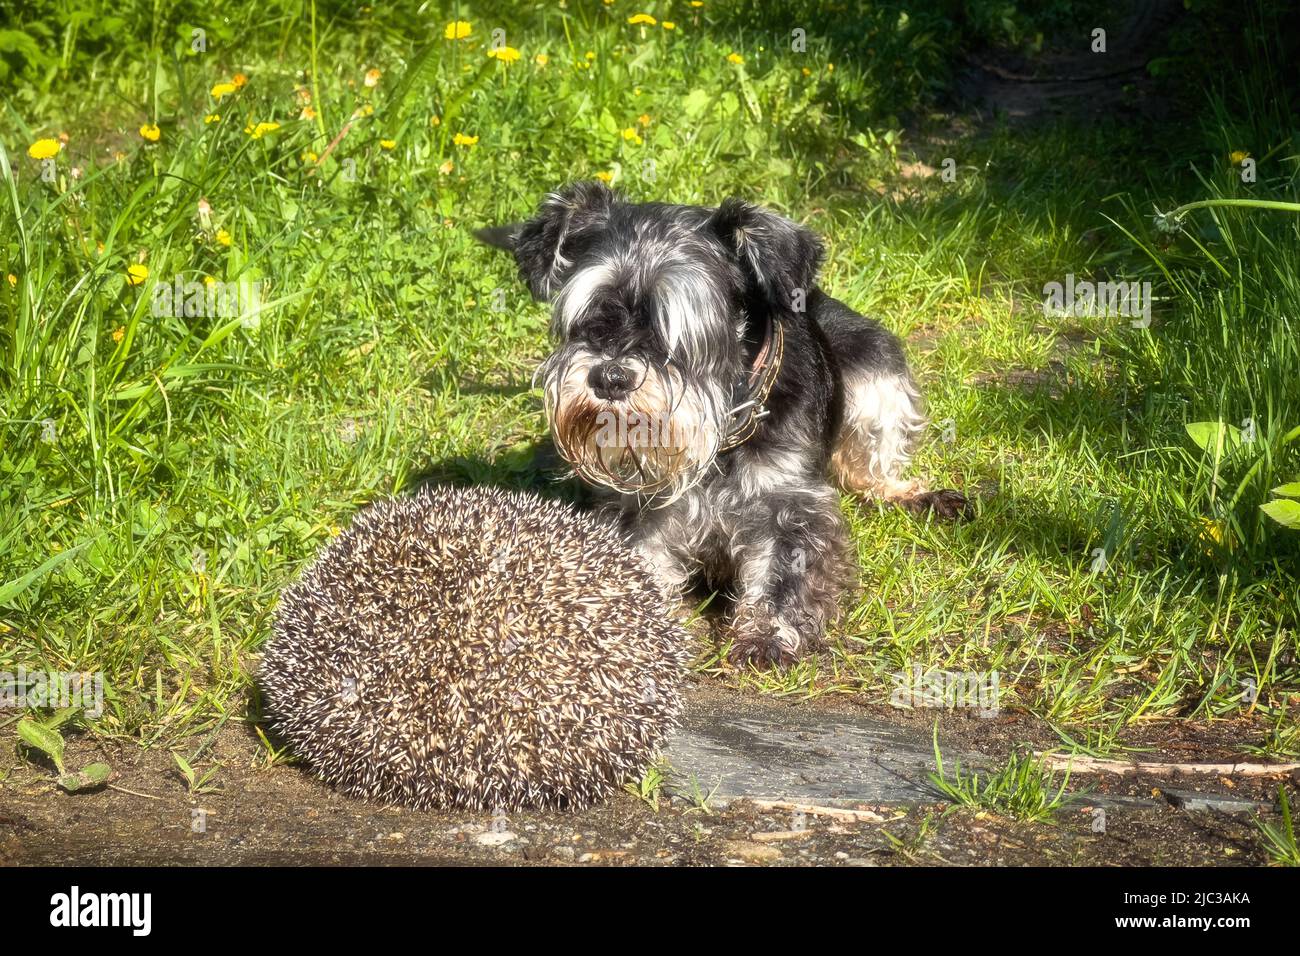 Miniature schnauzer hunting hedgehog. Wild animals often carry infectious diseases such as rabies. Stock Photo